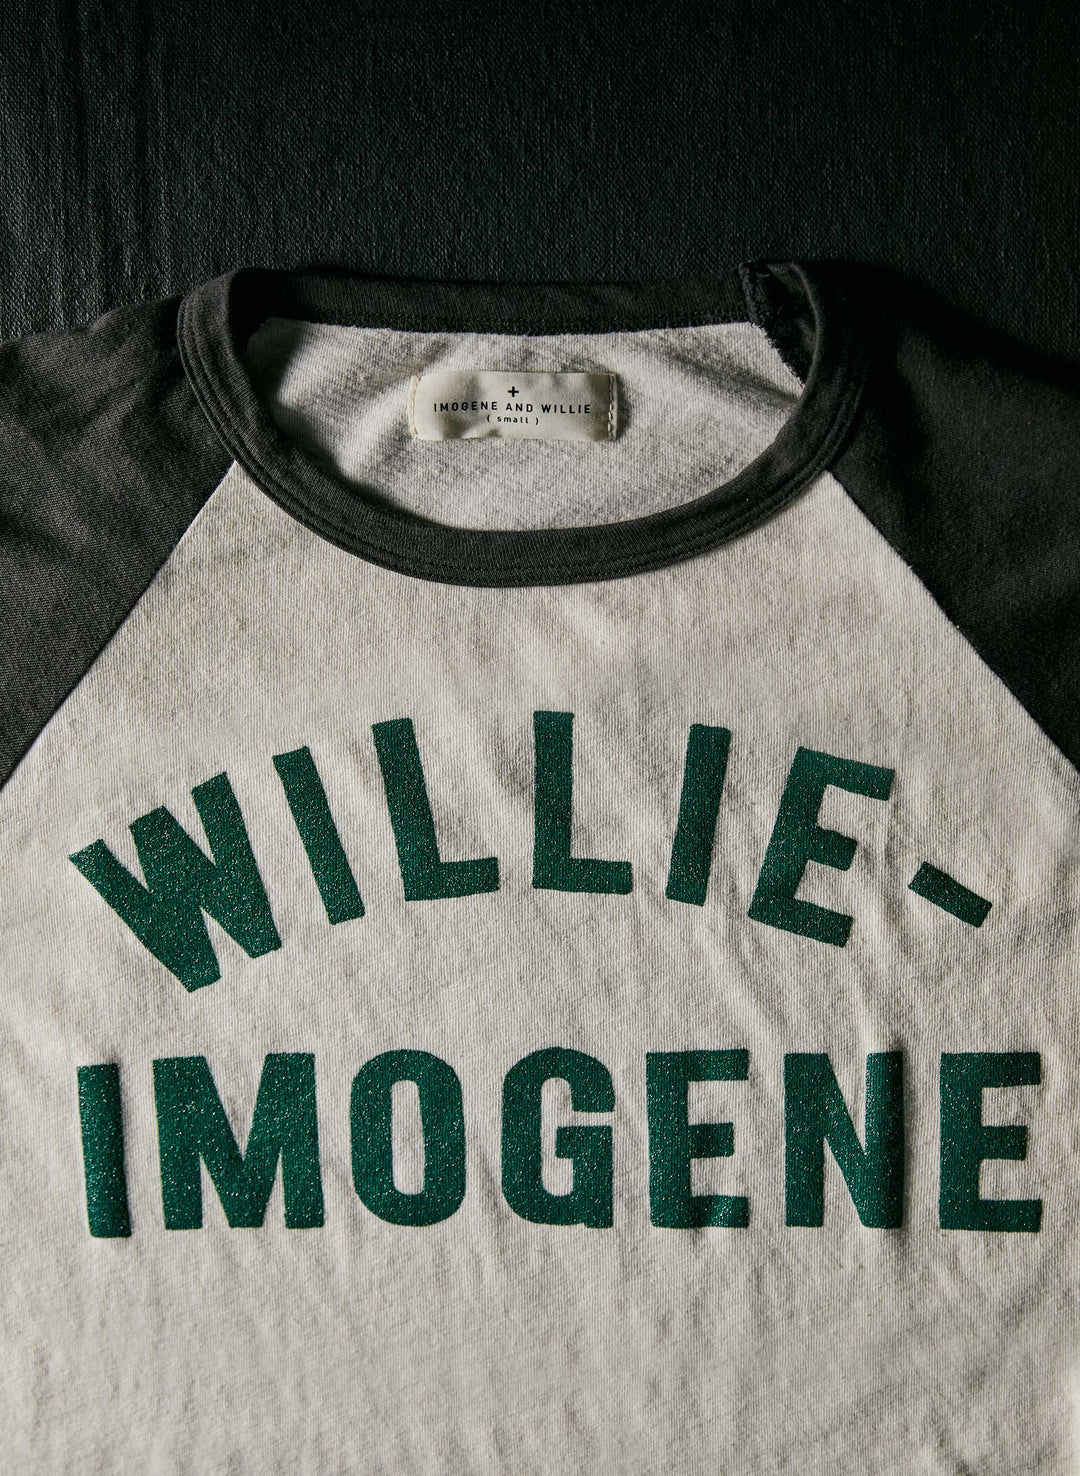 a black and white shirt with green letters